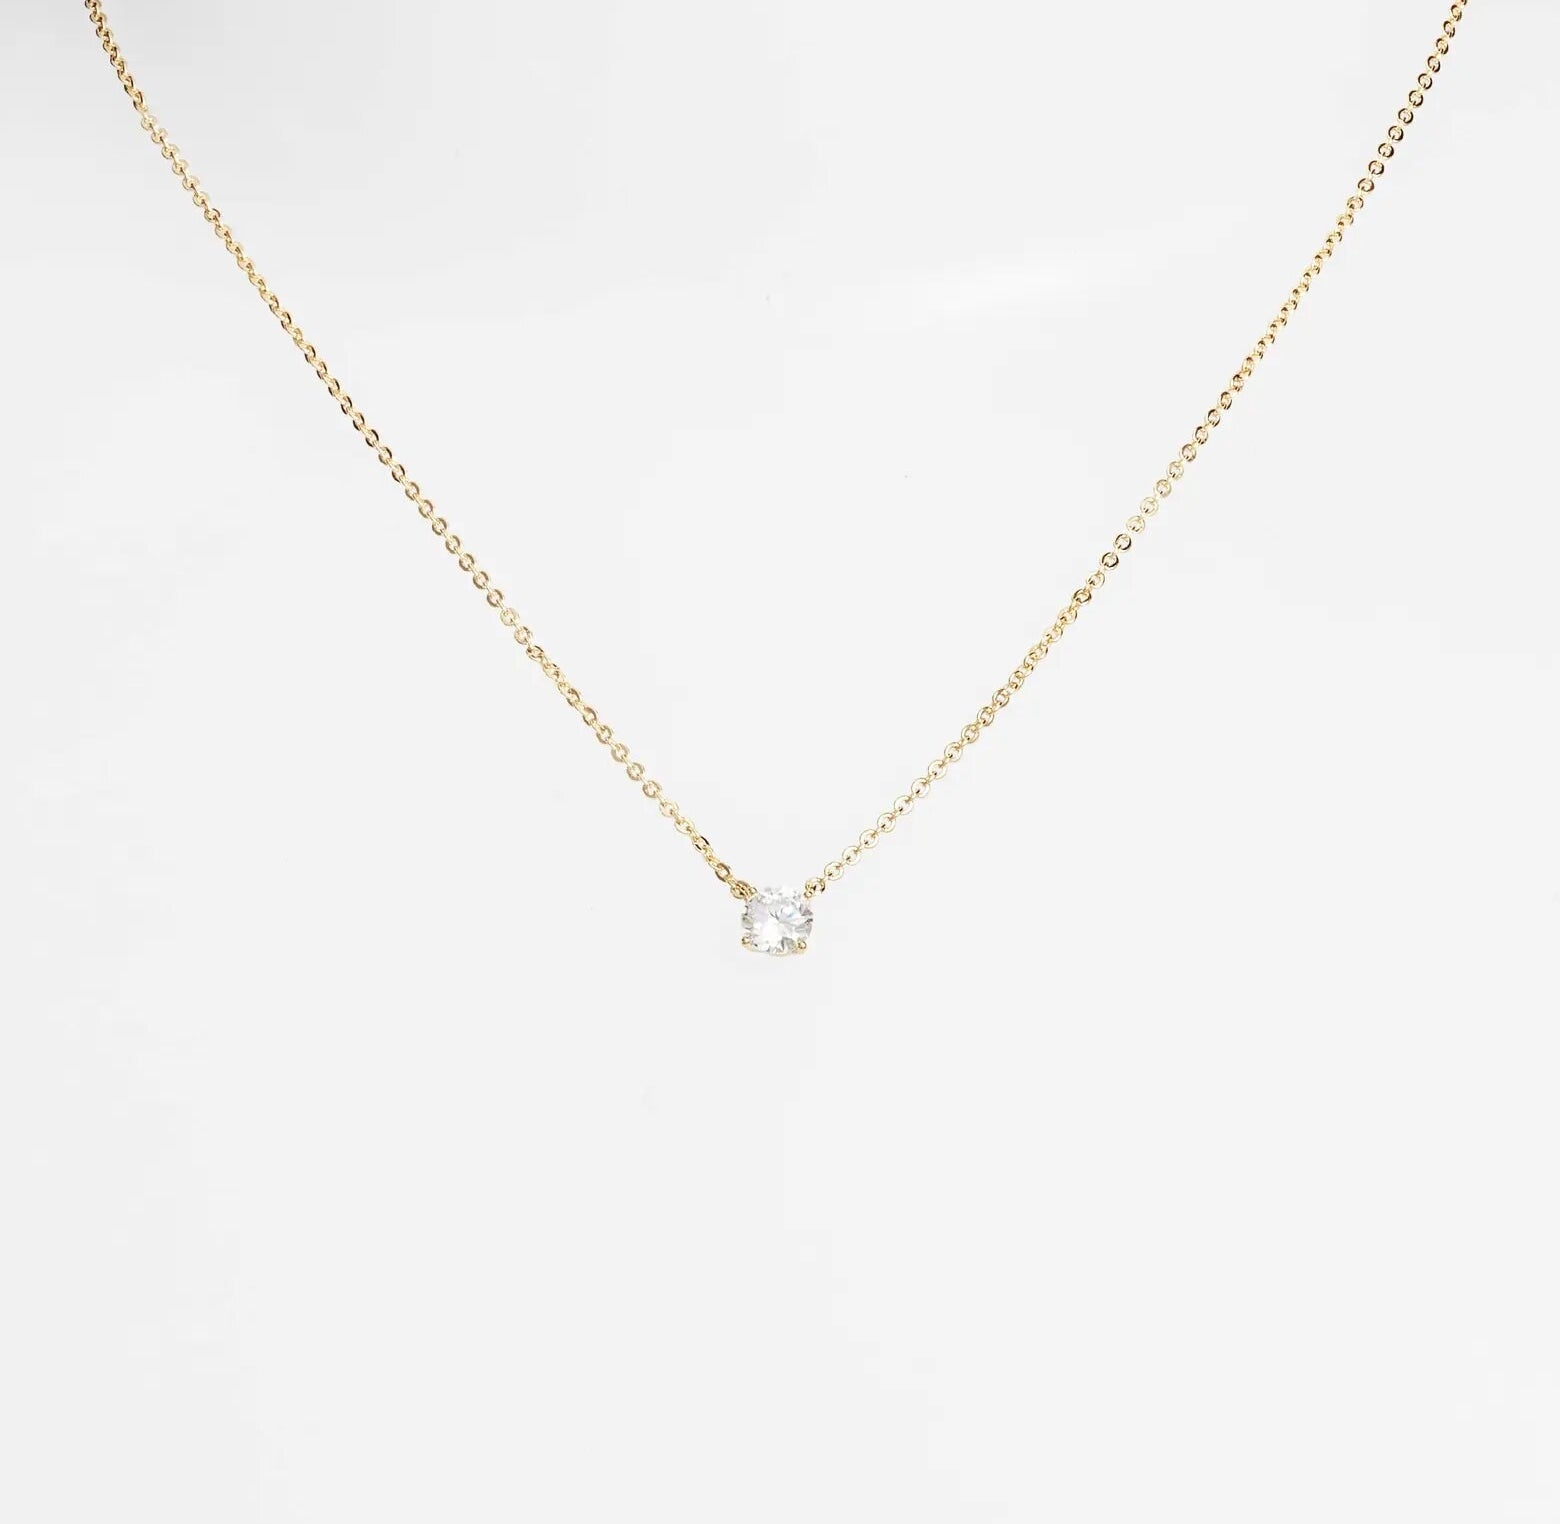 the necklace hanging off a mannequin-style neck